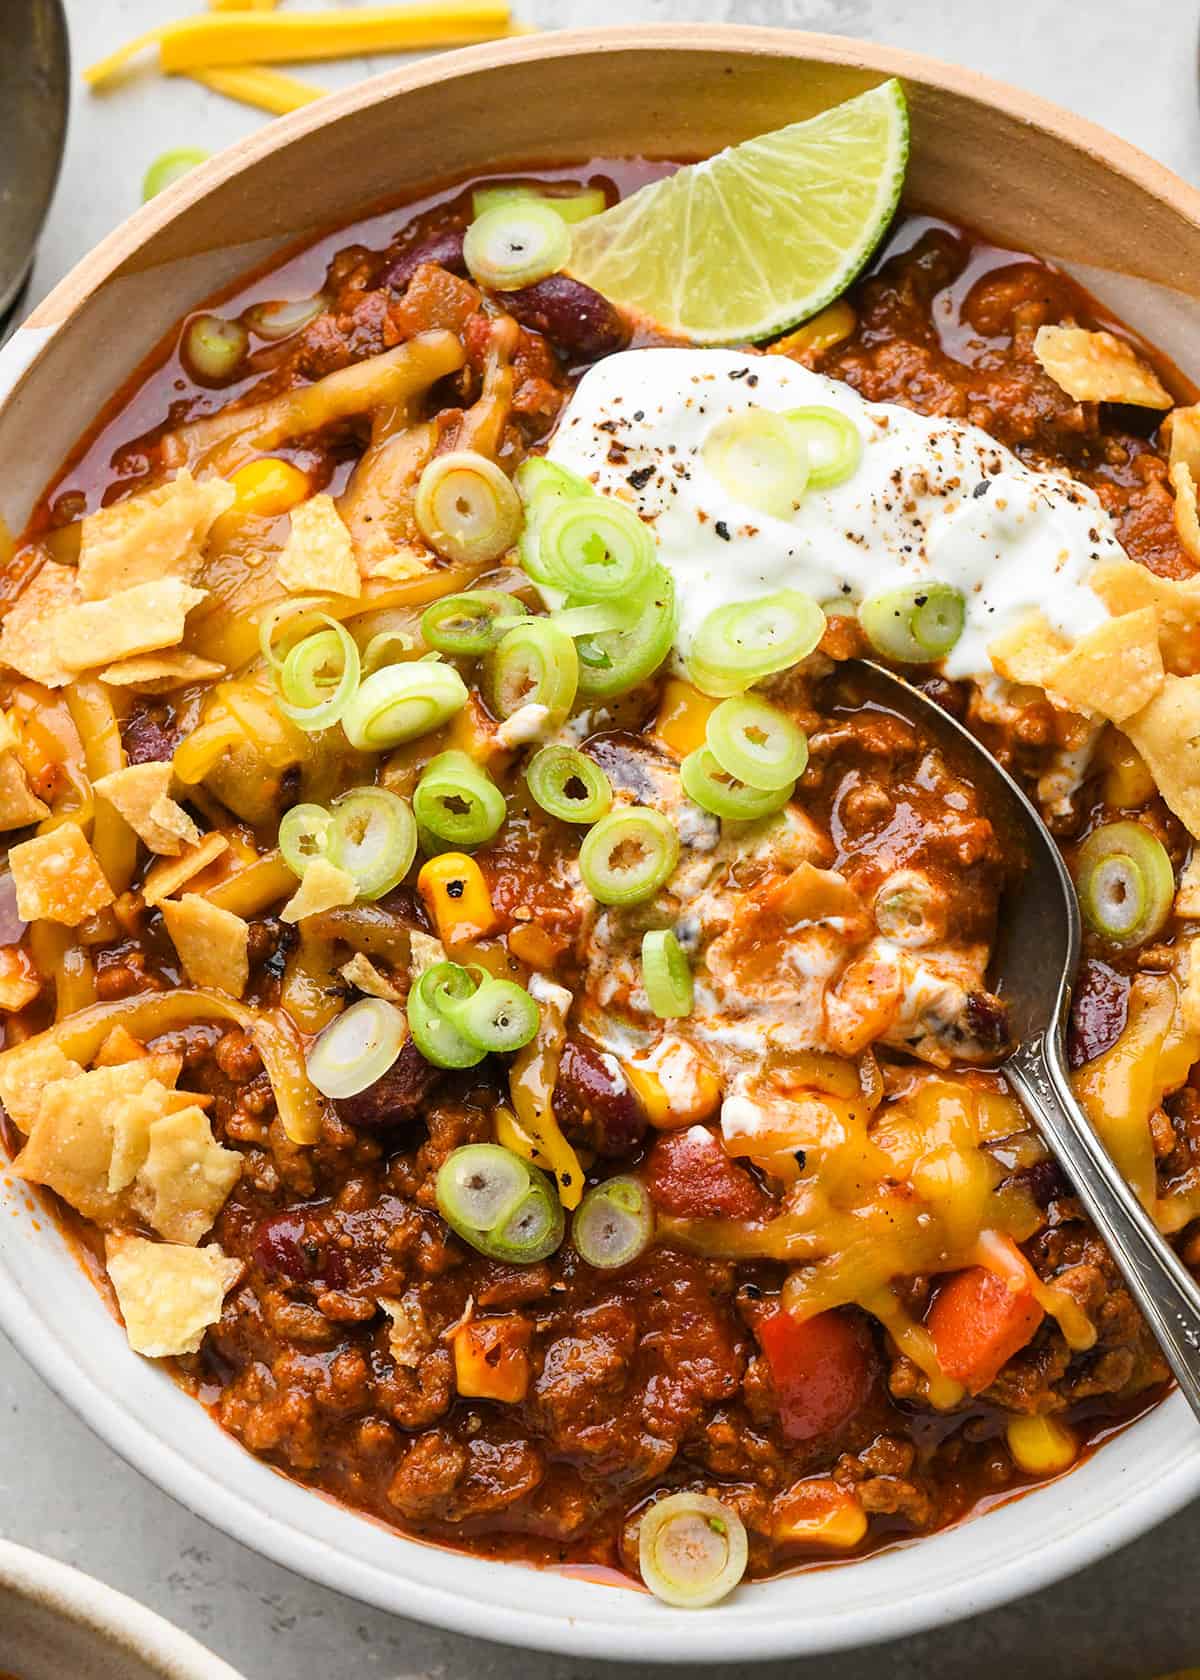 homemade chili in a bowl with a spoon topped with sour cream, onions and cheese